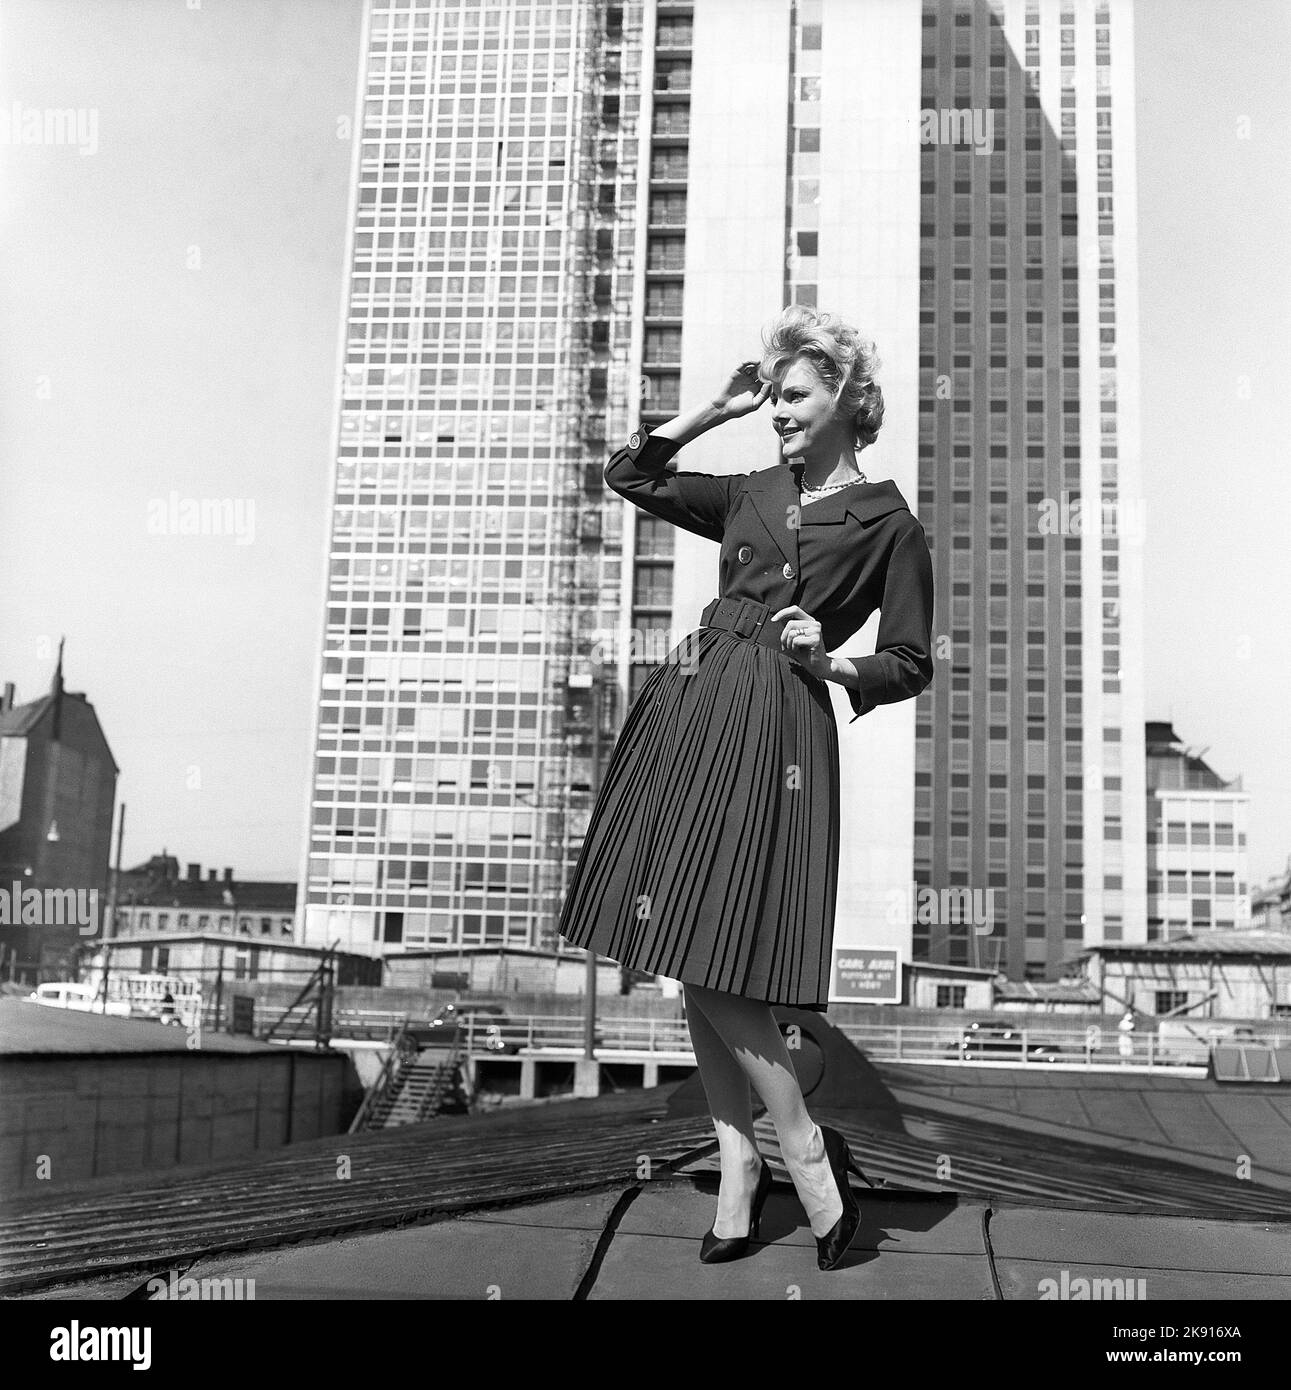 In the 1950s. A woman modelling a 1950s outfit with a jacket and skirt in matching dark. In the background the newly finished skyscraper housing the swedish tax offices. Sweden 1959 Kristoffersson ref CH21 Stock Photo